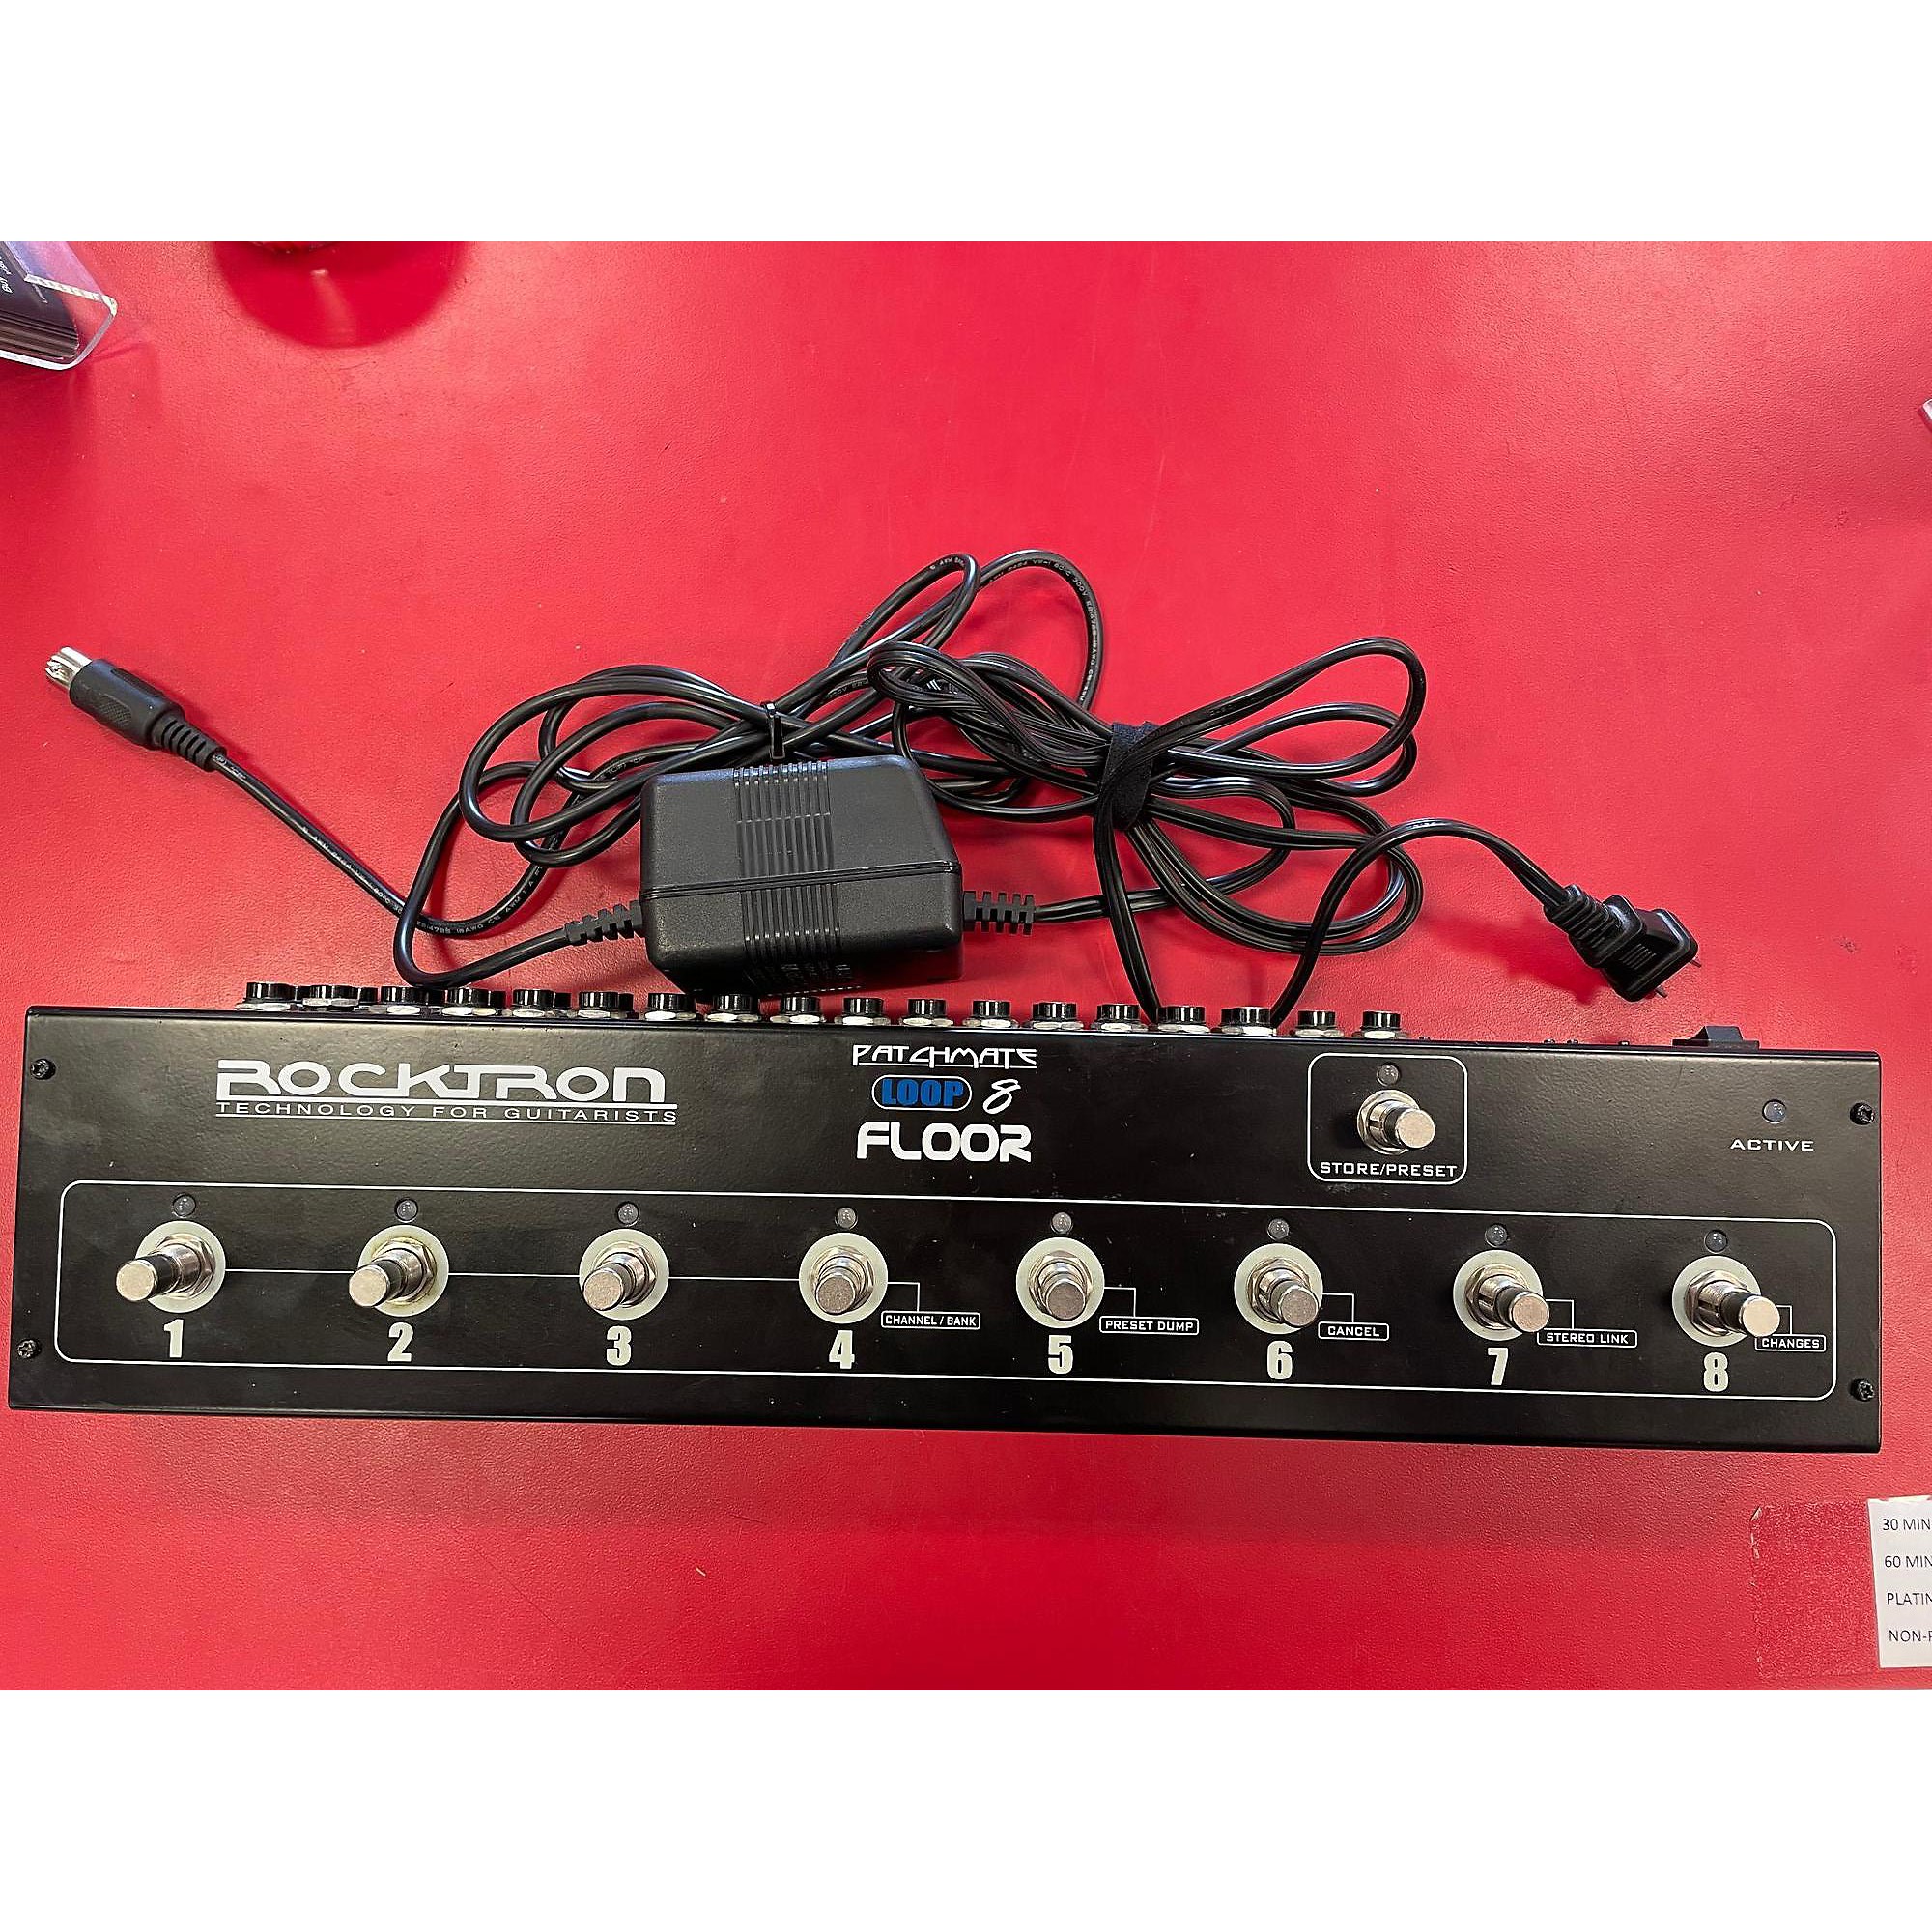 Used Rocktron Patchmate Loop 8 Floor Patch Bay | Guitar Center